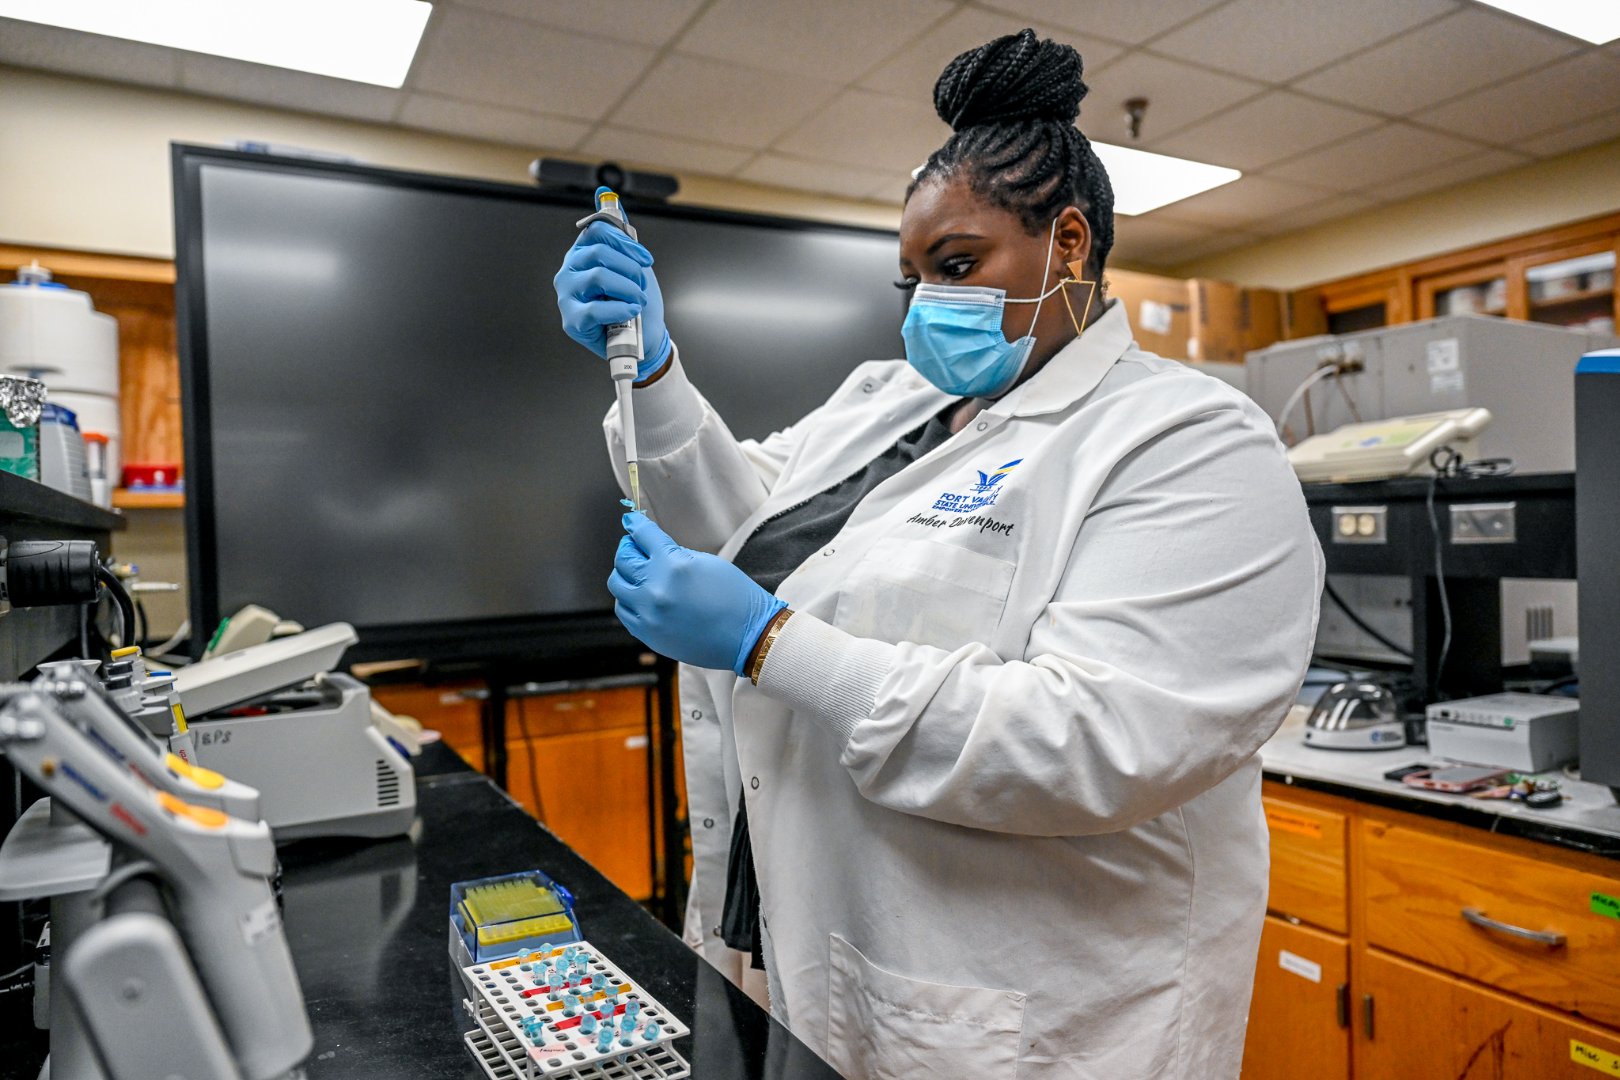 Davenport conducts research in the lab.